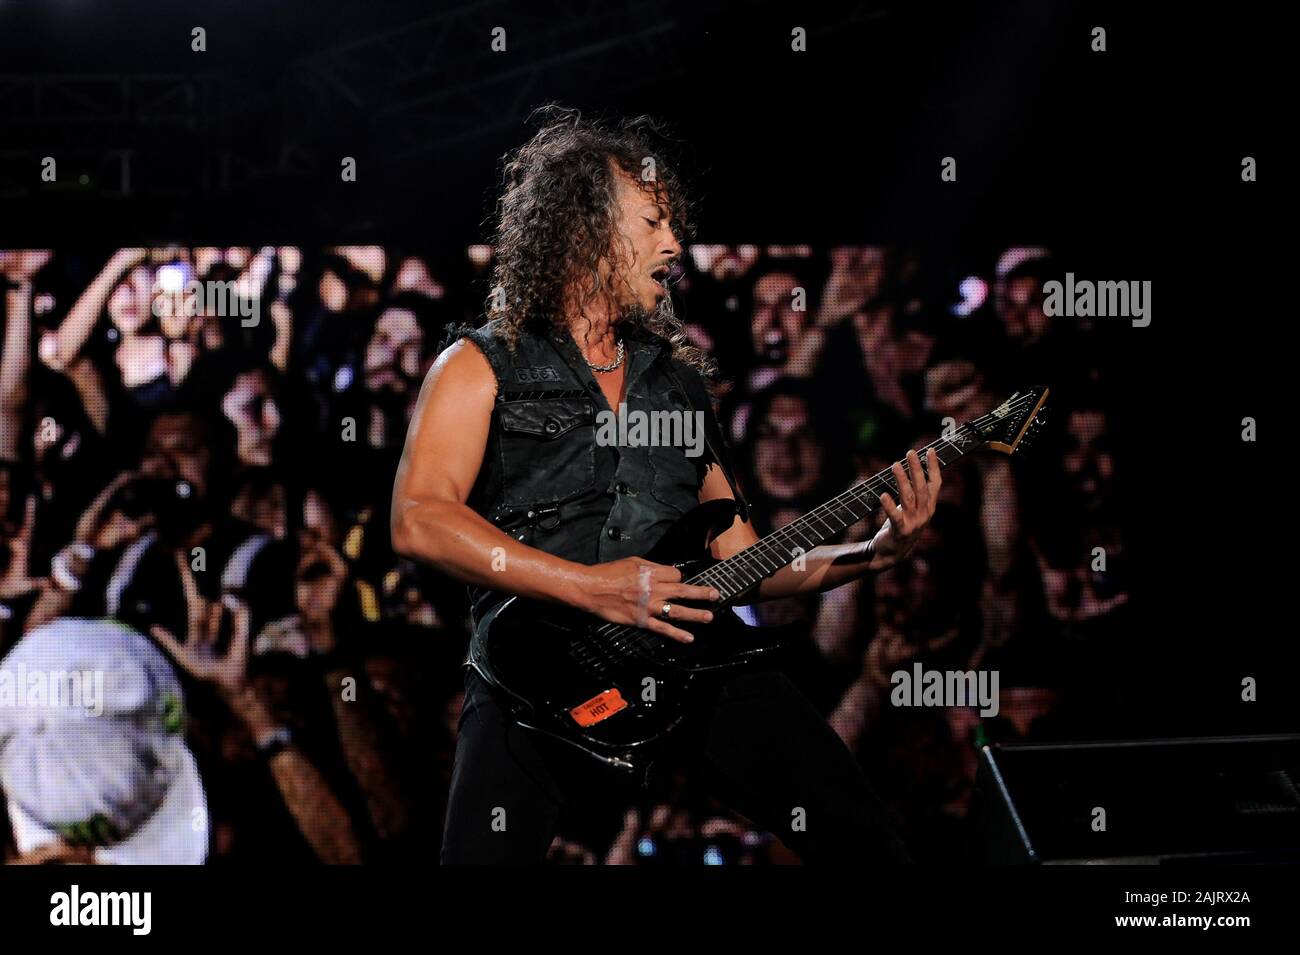 Milan  Italy , 06 July 2011 , Live concert of 'The Big 4' at the 'Arena Concerti Fiera Milano' : The guitarist of the Metallica band, Kirk Hammett, during the concert Stock Photo